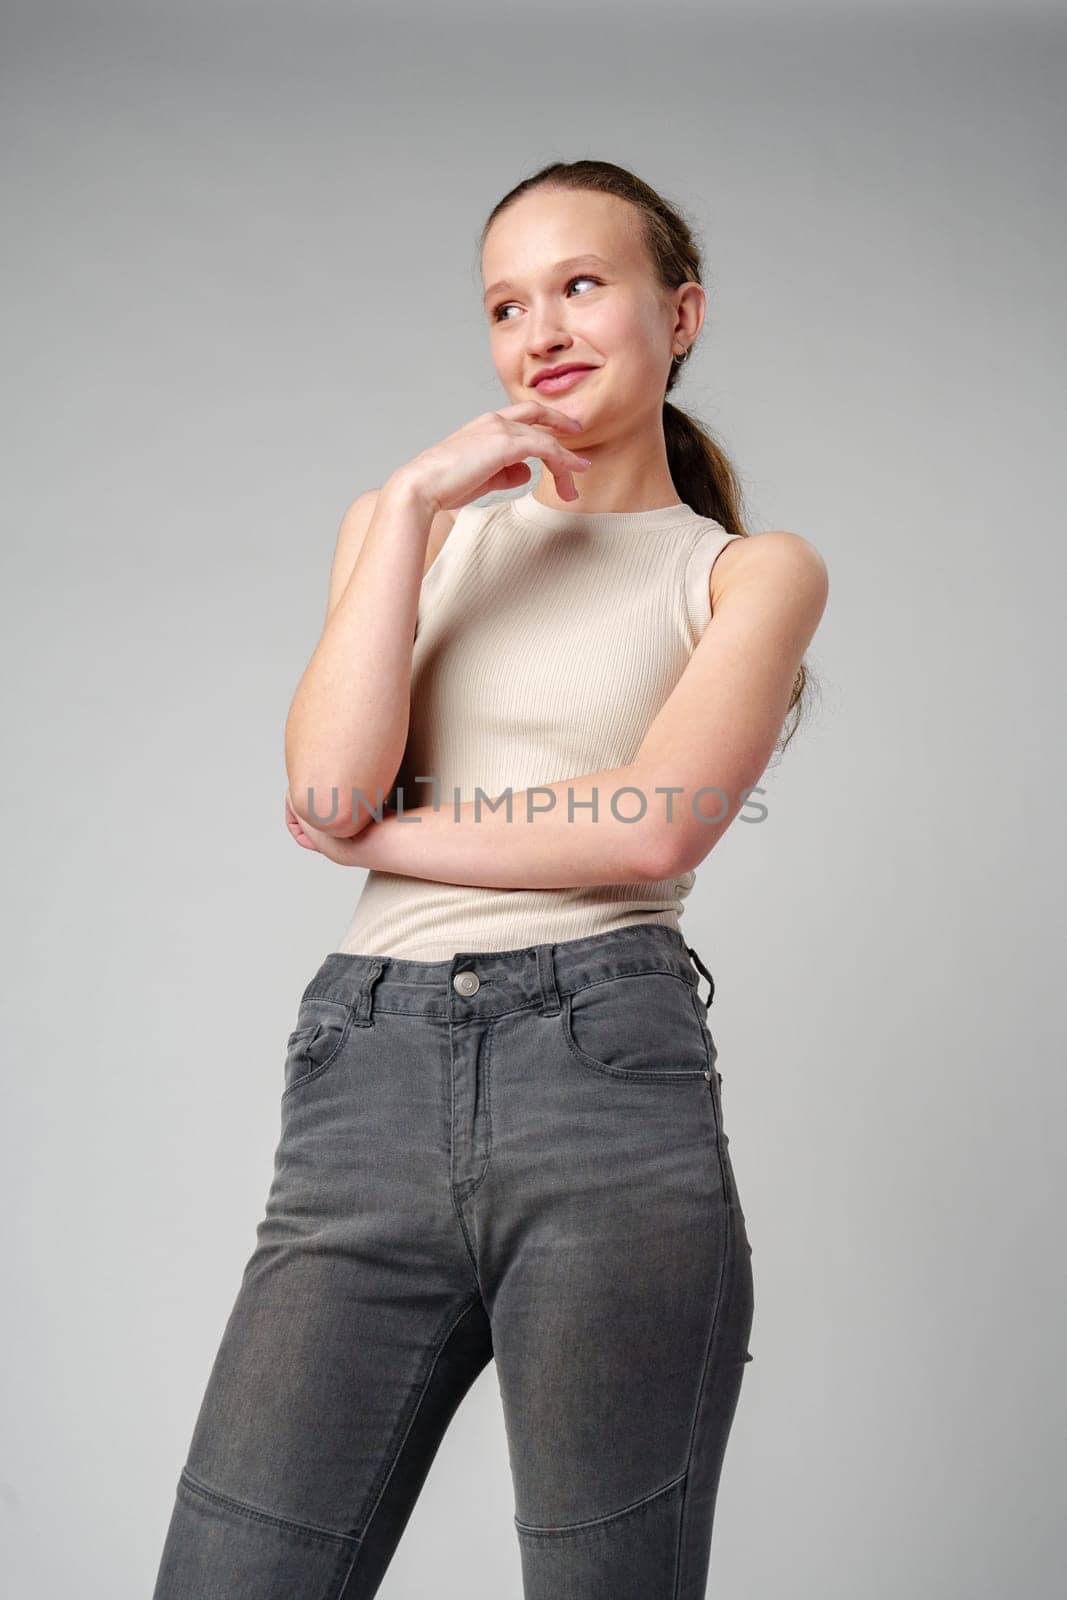 Girl in Beige Tank Top and Grey Jeans on gray background by Fabrikasimf